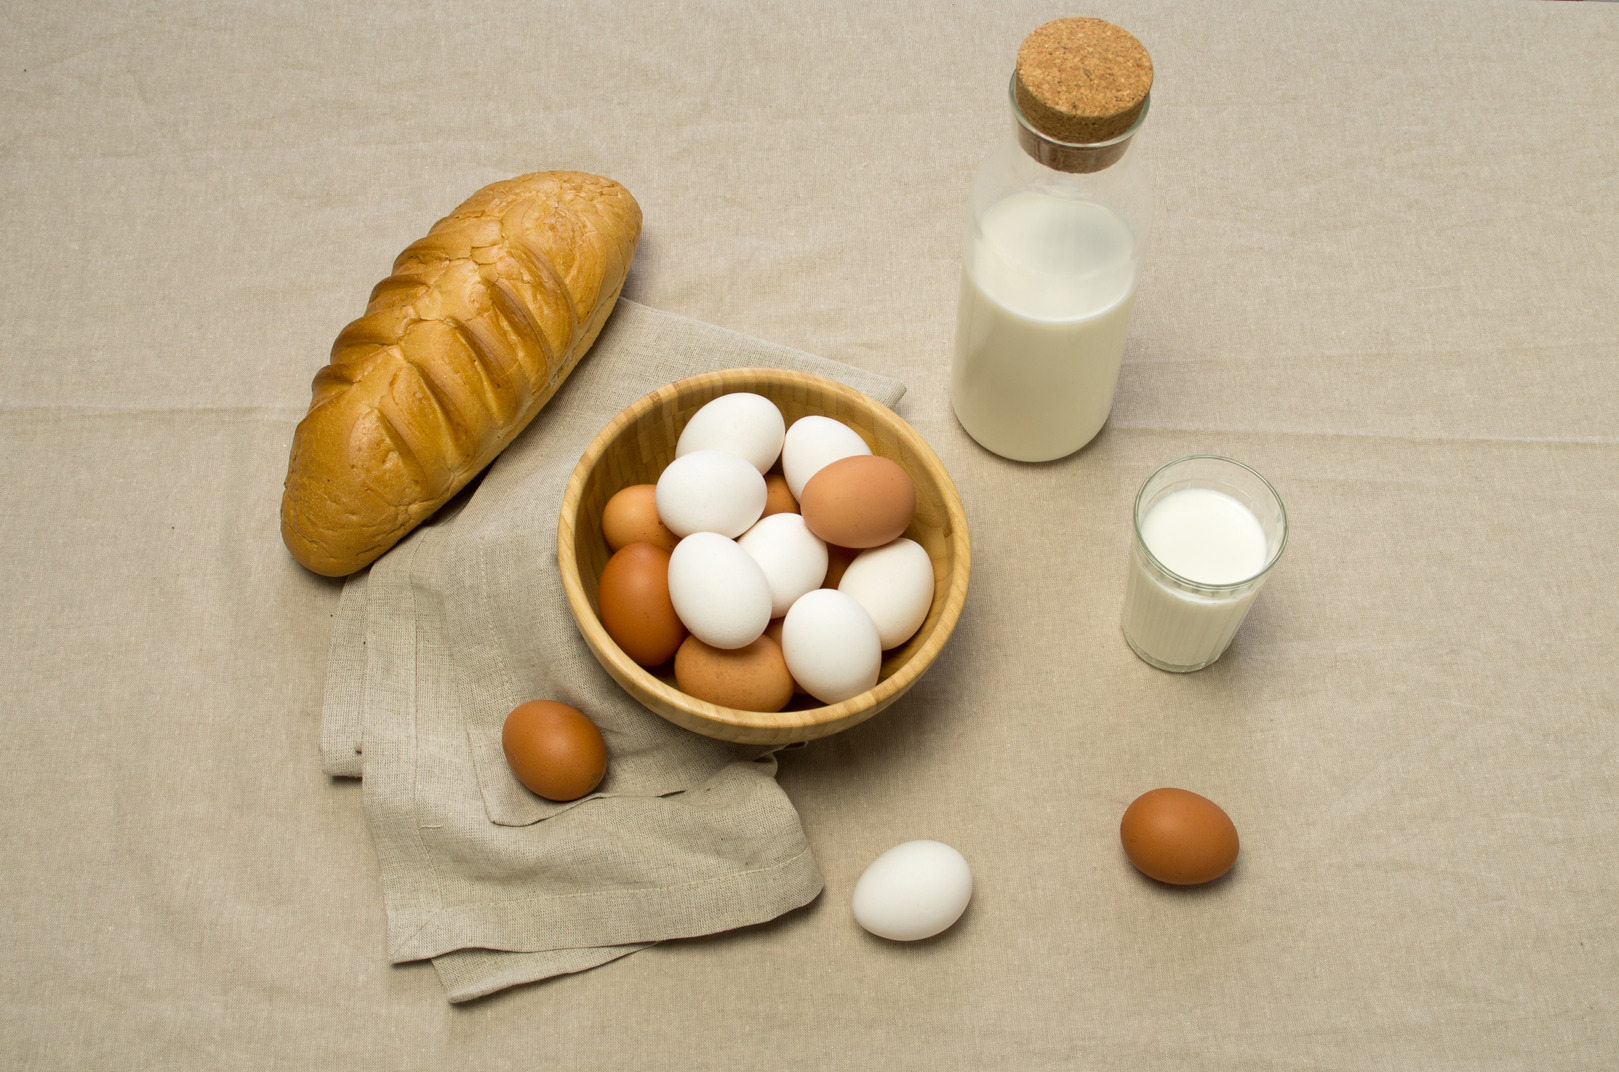 Chicken eggs, some milk and a loaf of bread on a gray tablecloth